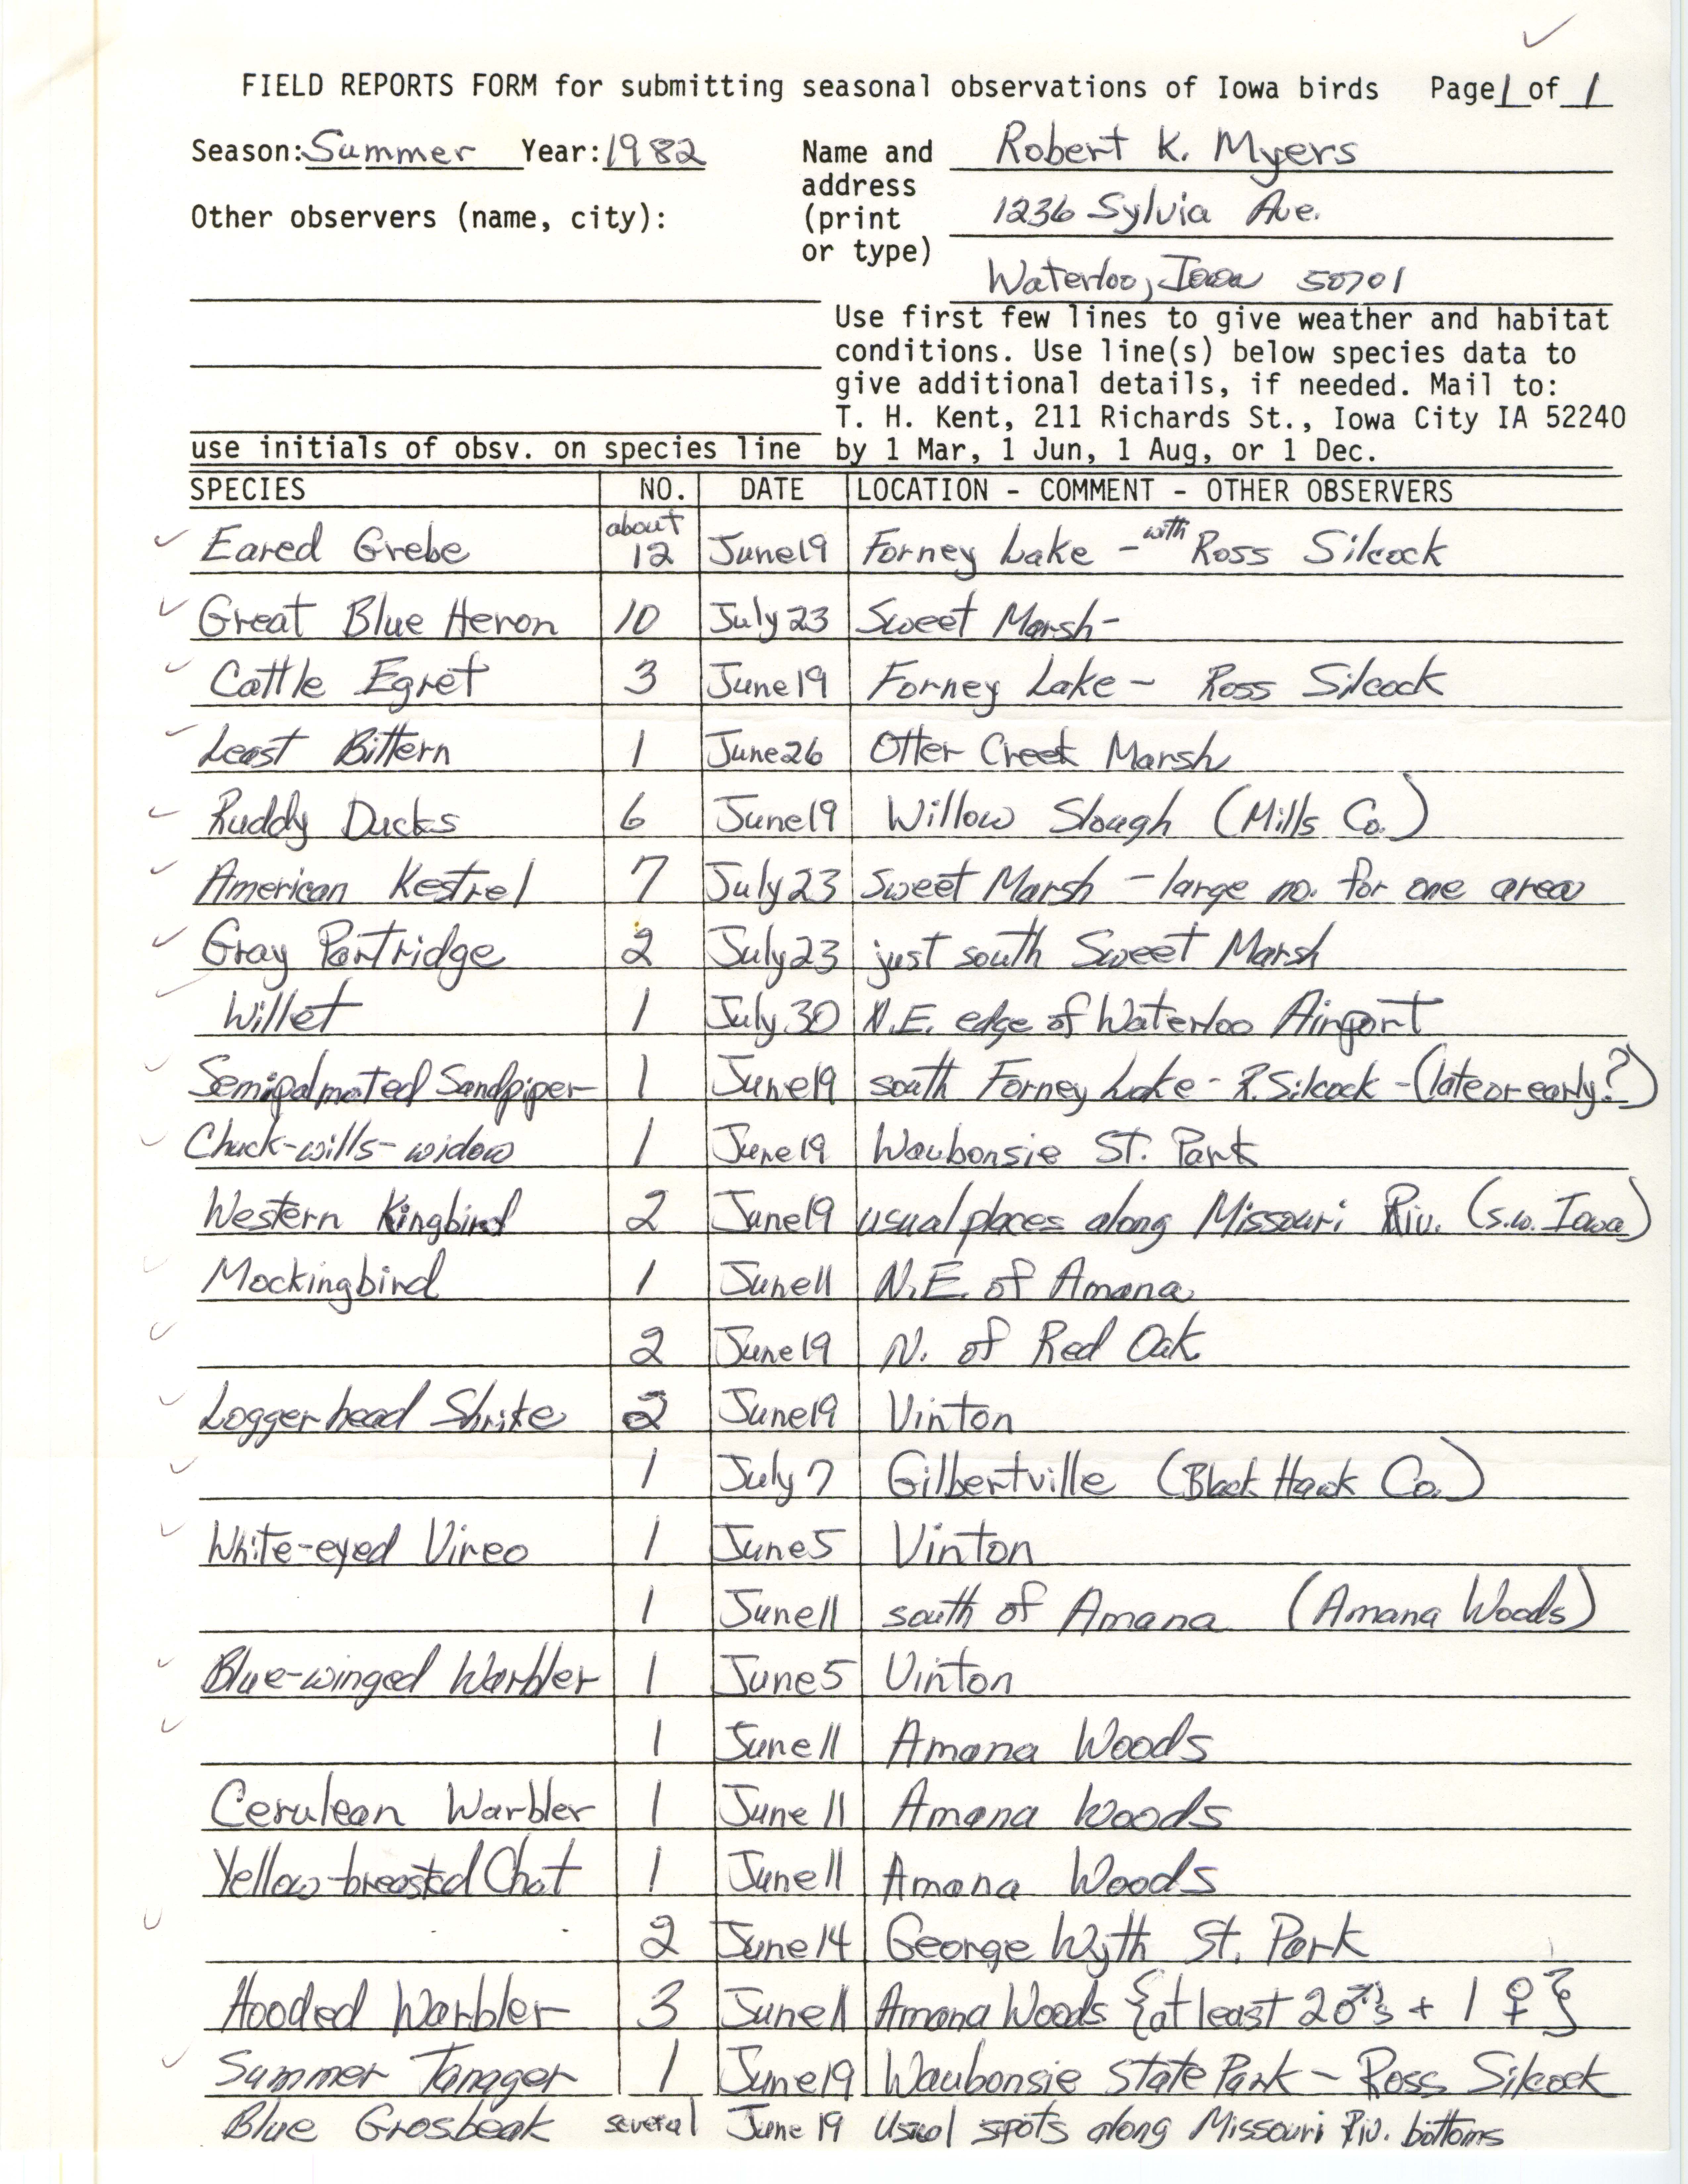 Field report contributed by Robert K. Myers, summer 1982